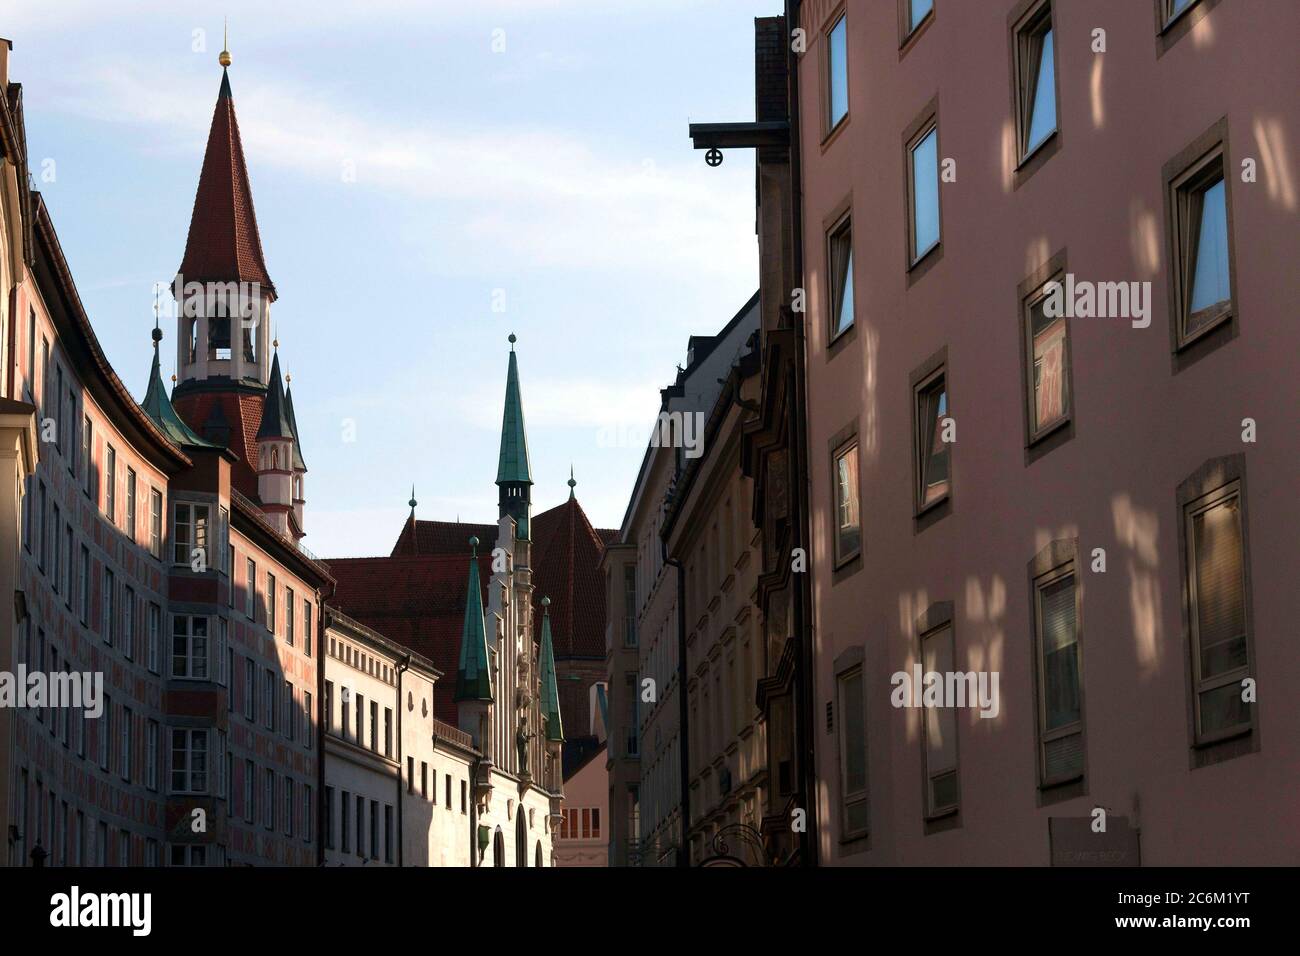 Part of the Old Rathaus ( Town Hall ) seen from Diener street, Munich, Upper Bavaria, Germany Stock Photo